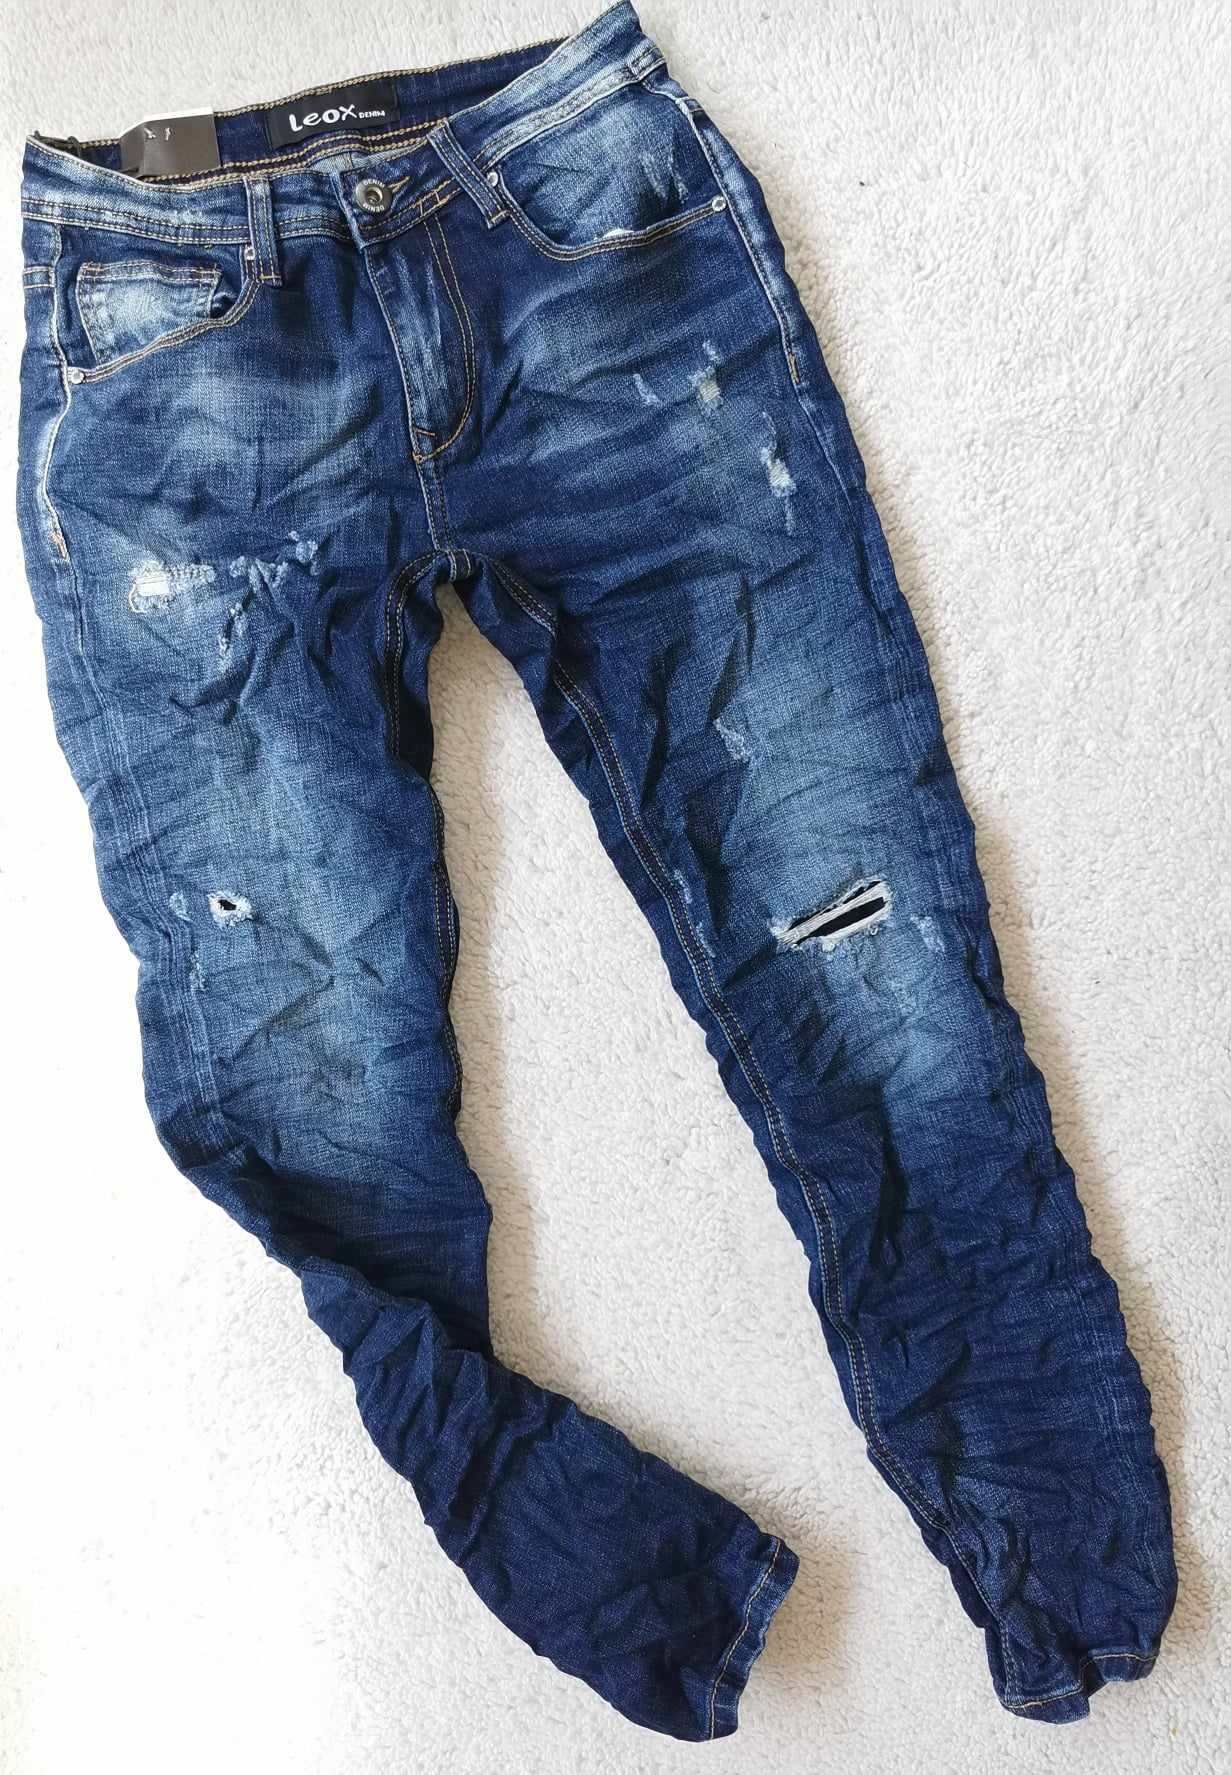 TROUSER LEOX 23/24 ΜΟΝΟC. JEANS WITH SLIT ΜΑΝ